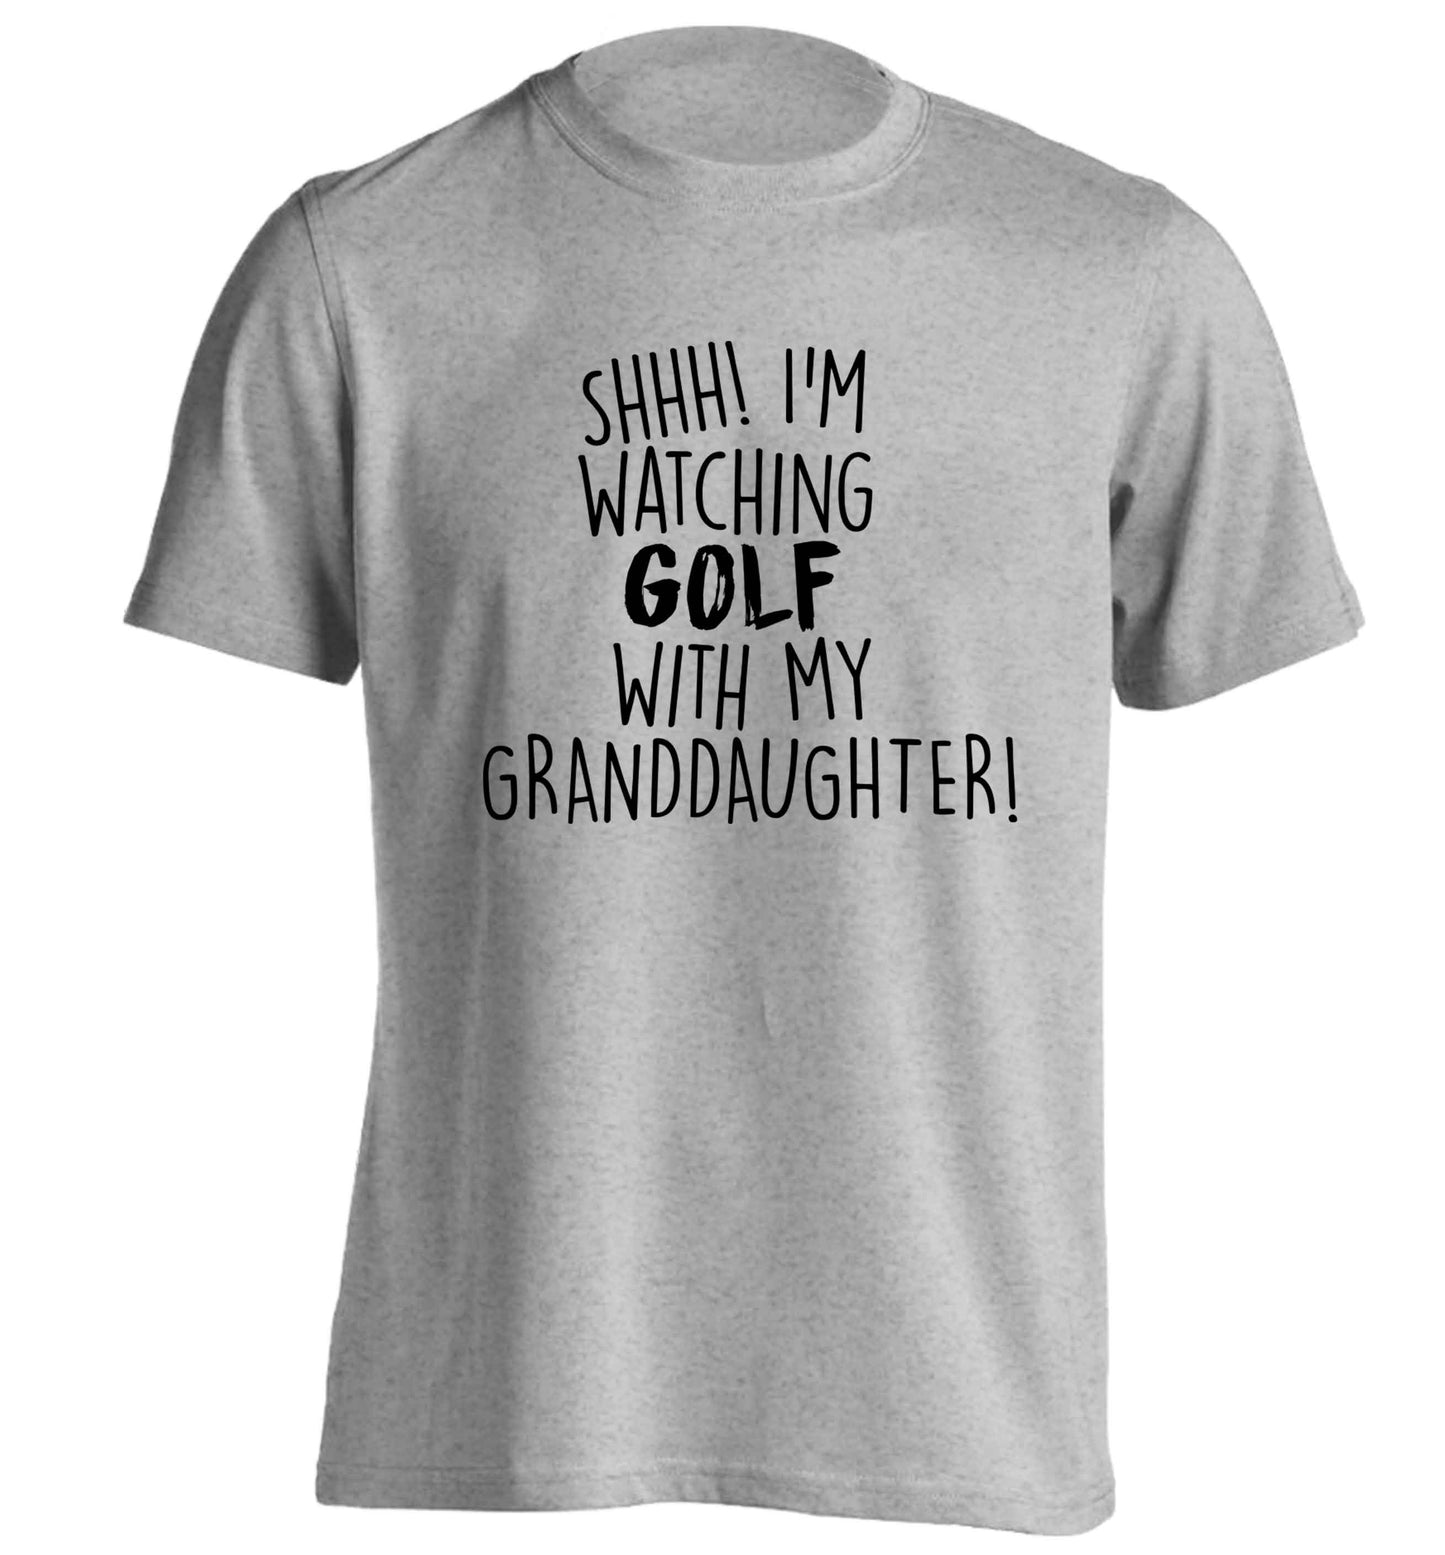 Shh I'm watching golf with my granddaughter adults unisex grey Tshirt 2XL